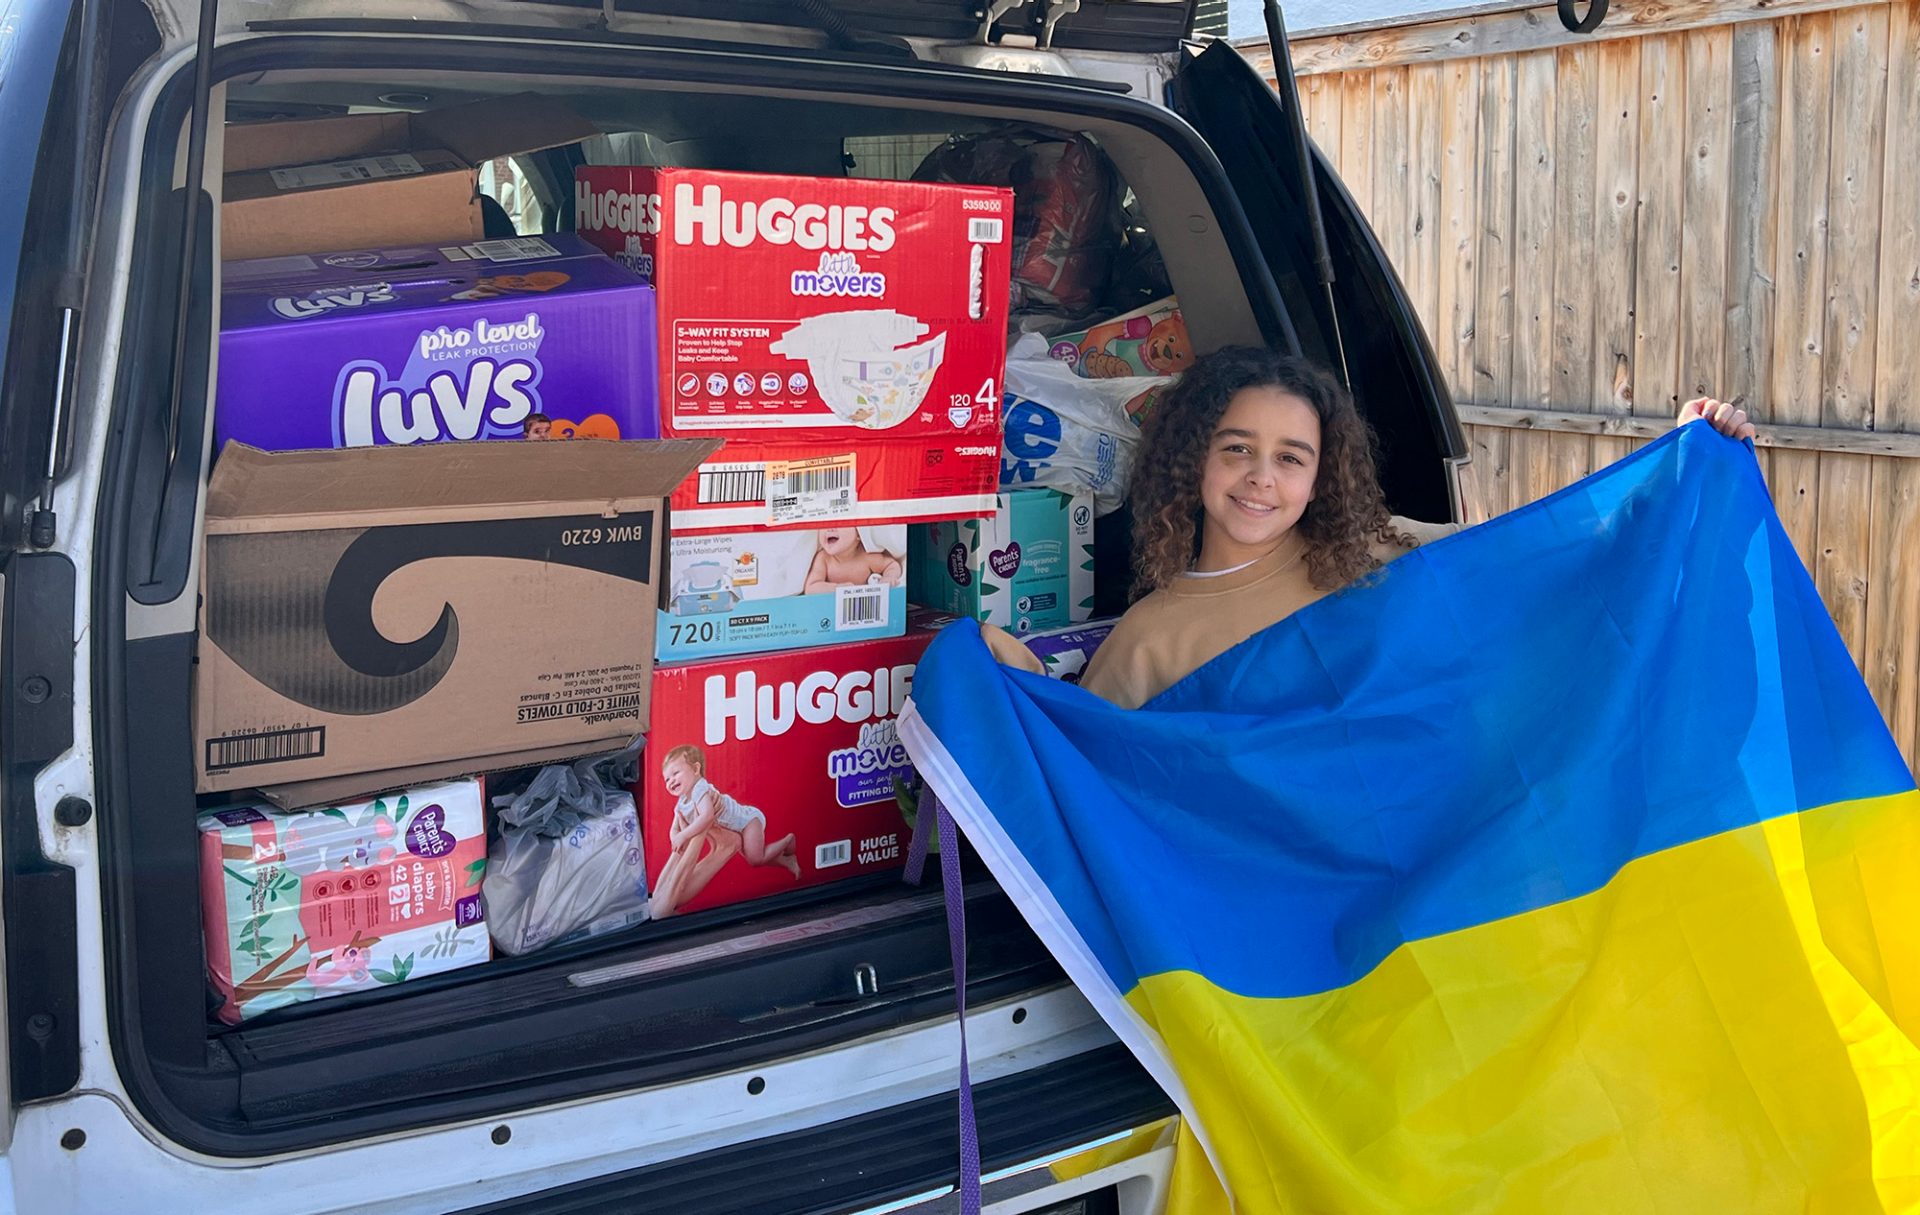 Girl Scout holding a Ukrainian flag in front of a SUV loaded with donations